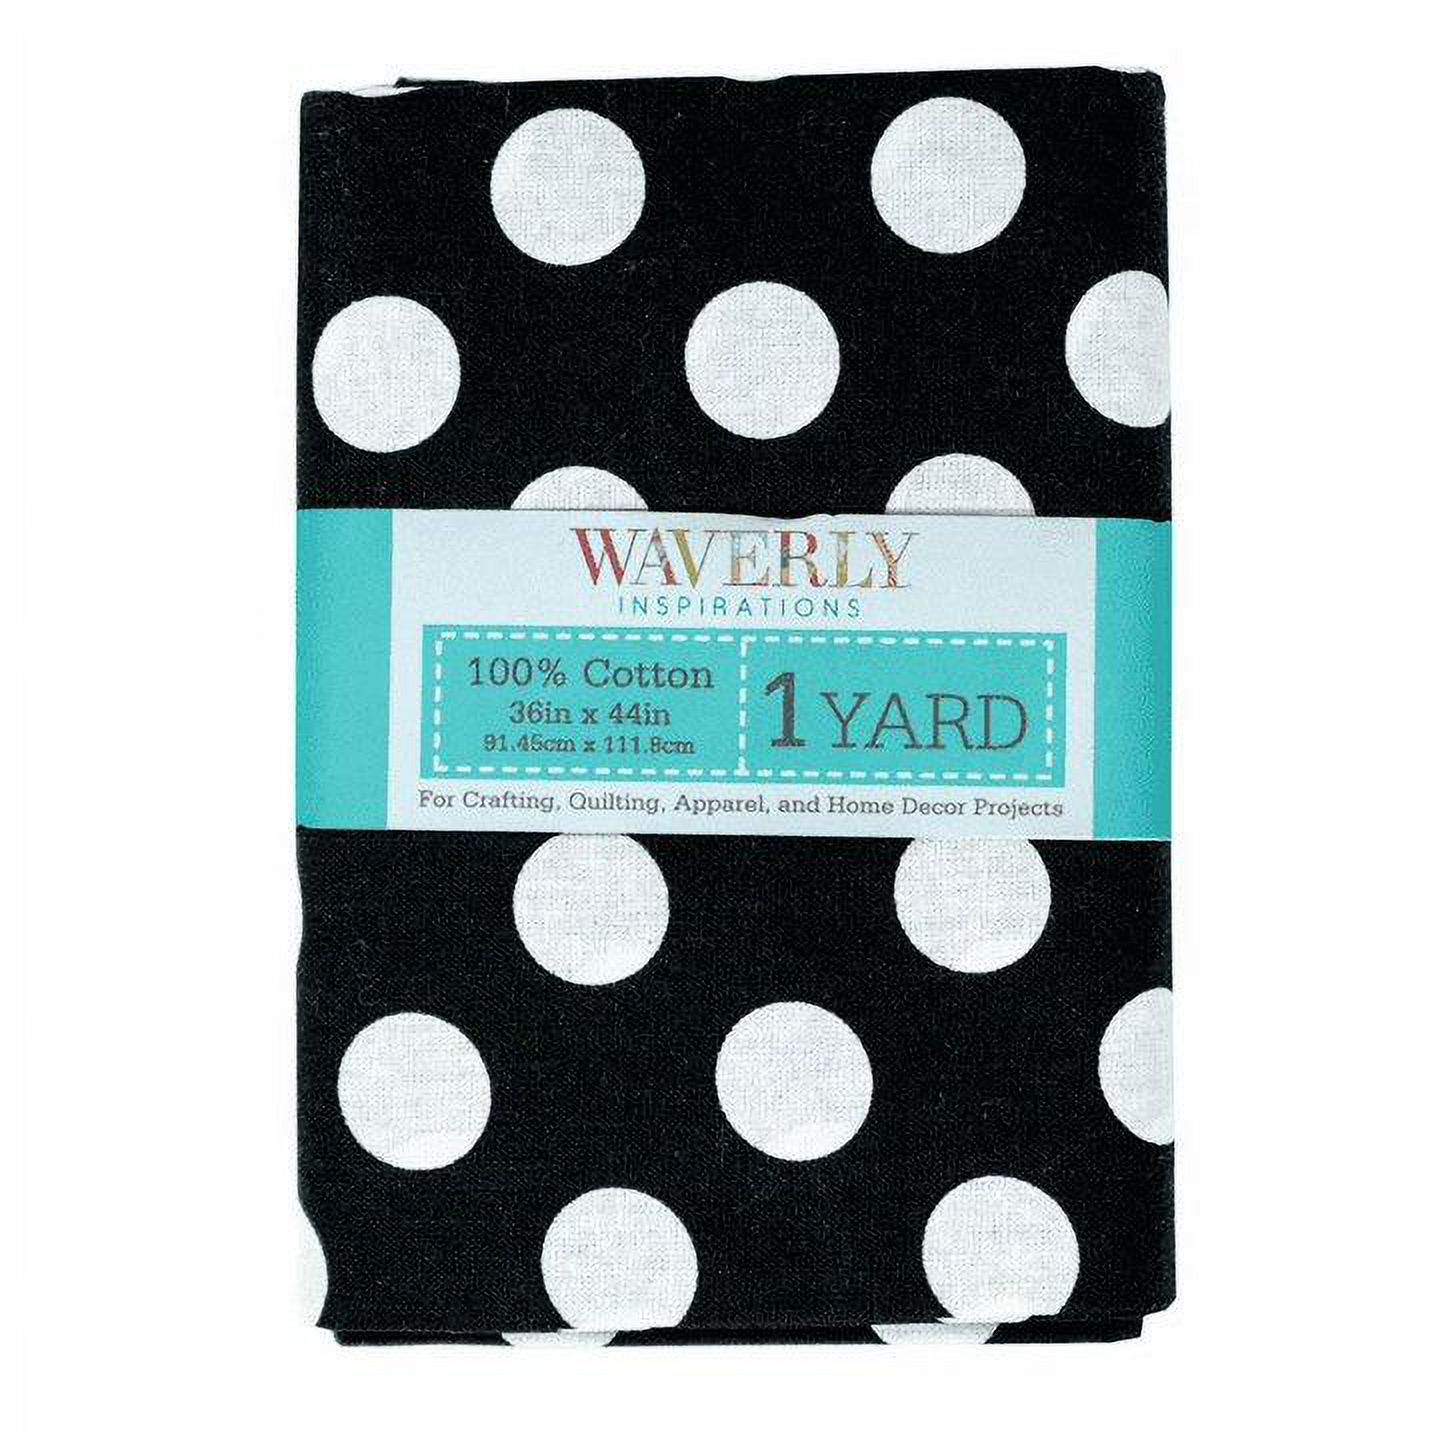 Waverly Inspirations 44" x 1 Yard Cotton Precut Large Dot Onyx Color Sewing Fabric, 1 Each - image 2 of 3